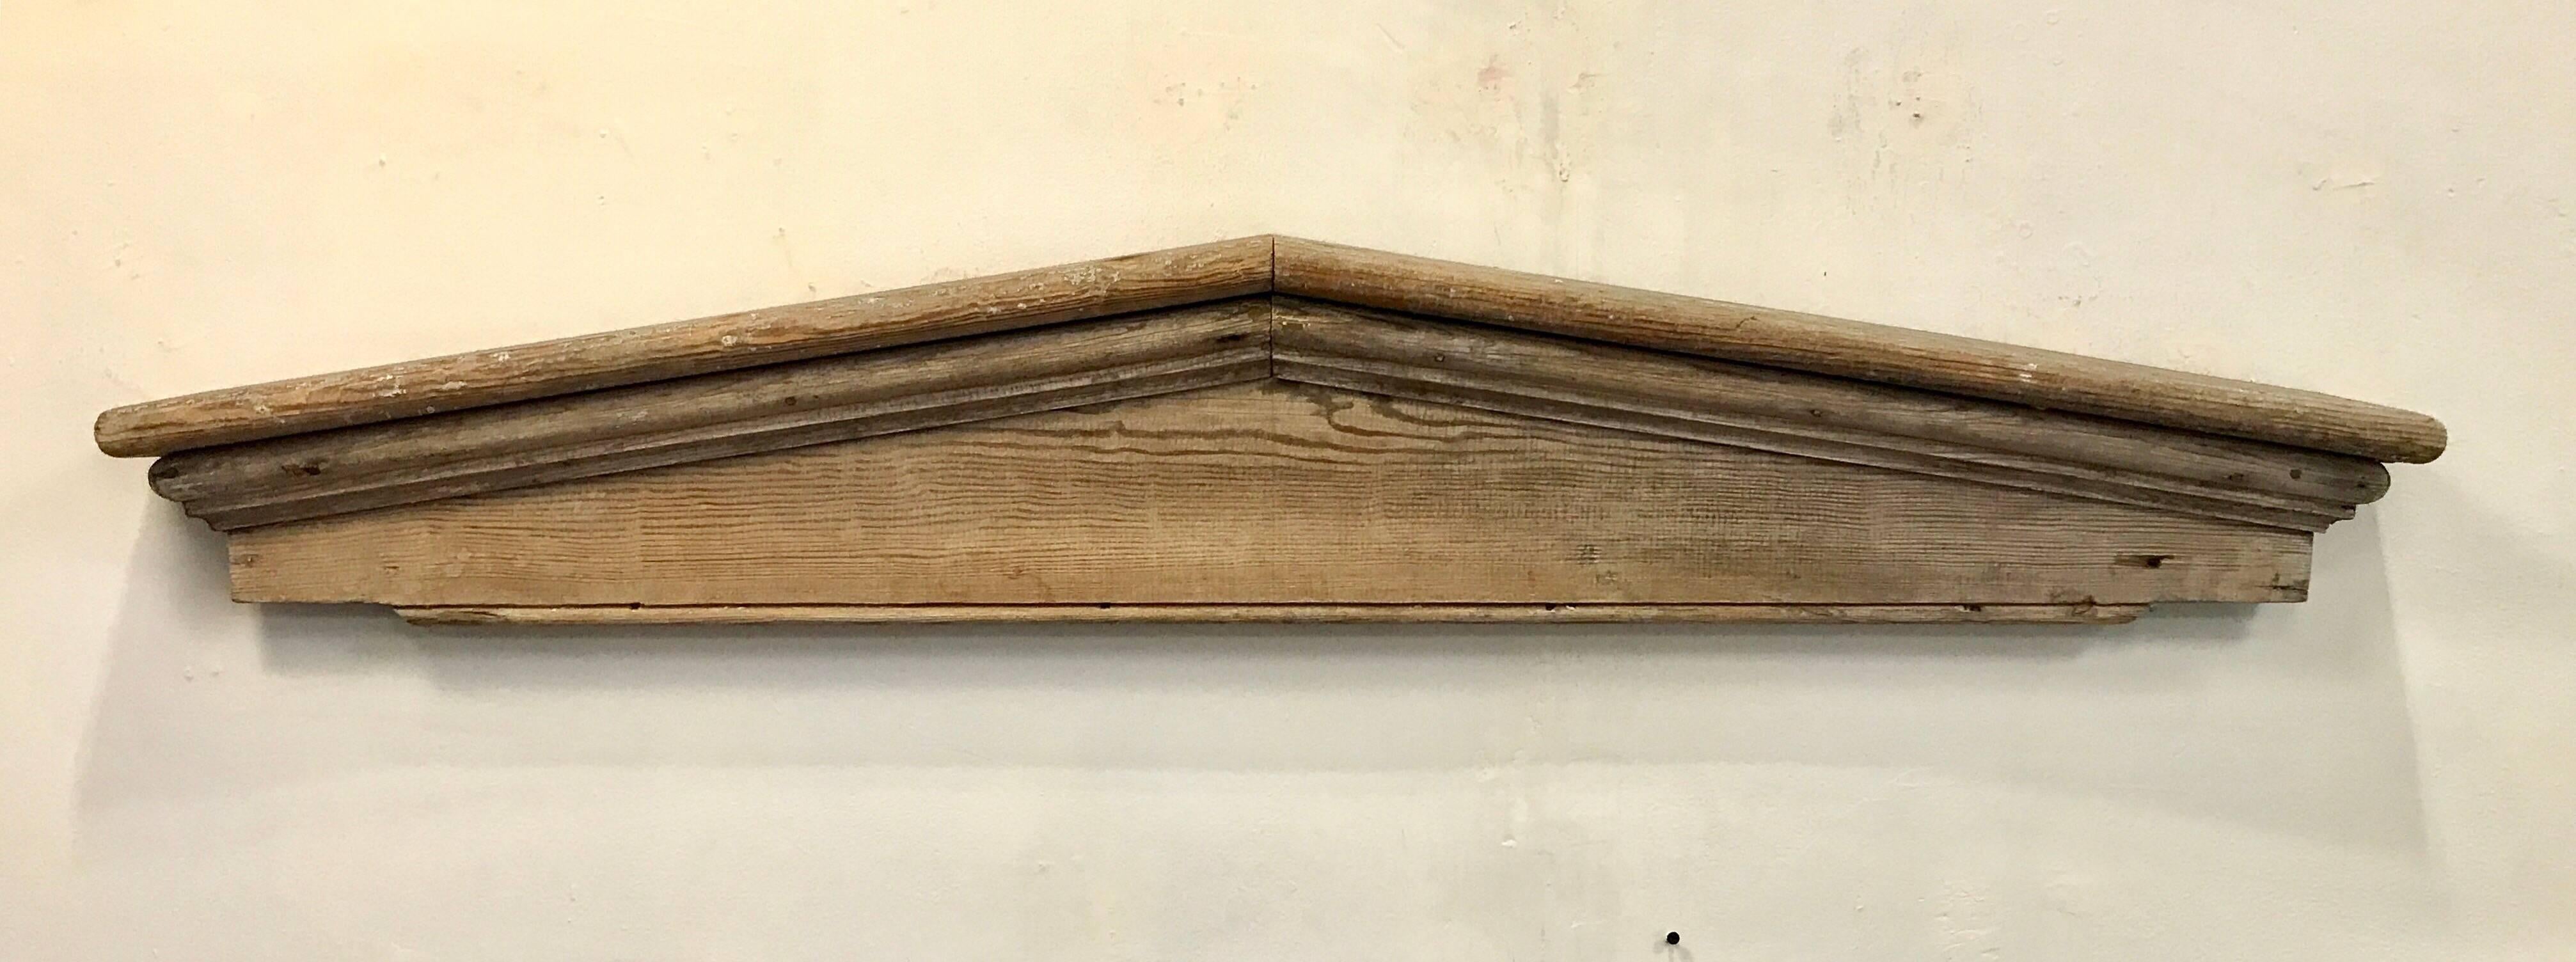 Architectural Pediments of Whitewashed Pine, Pair 1